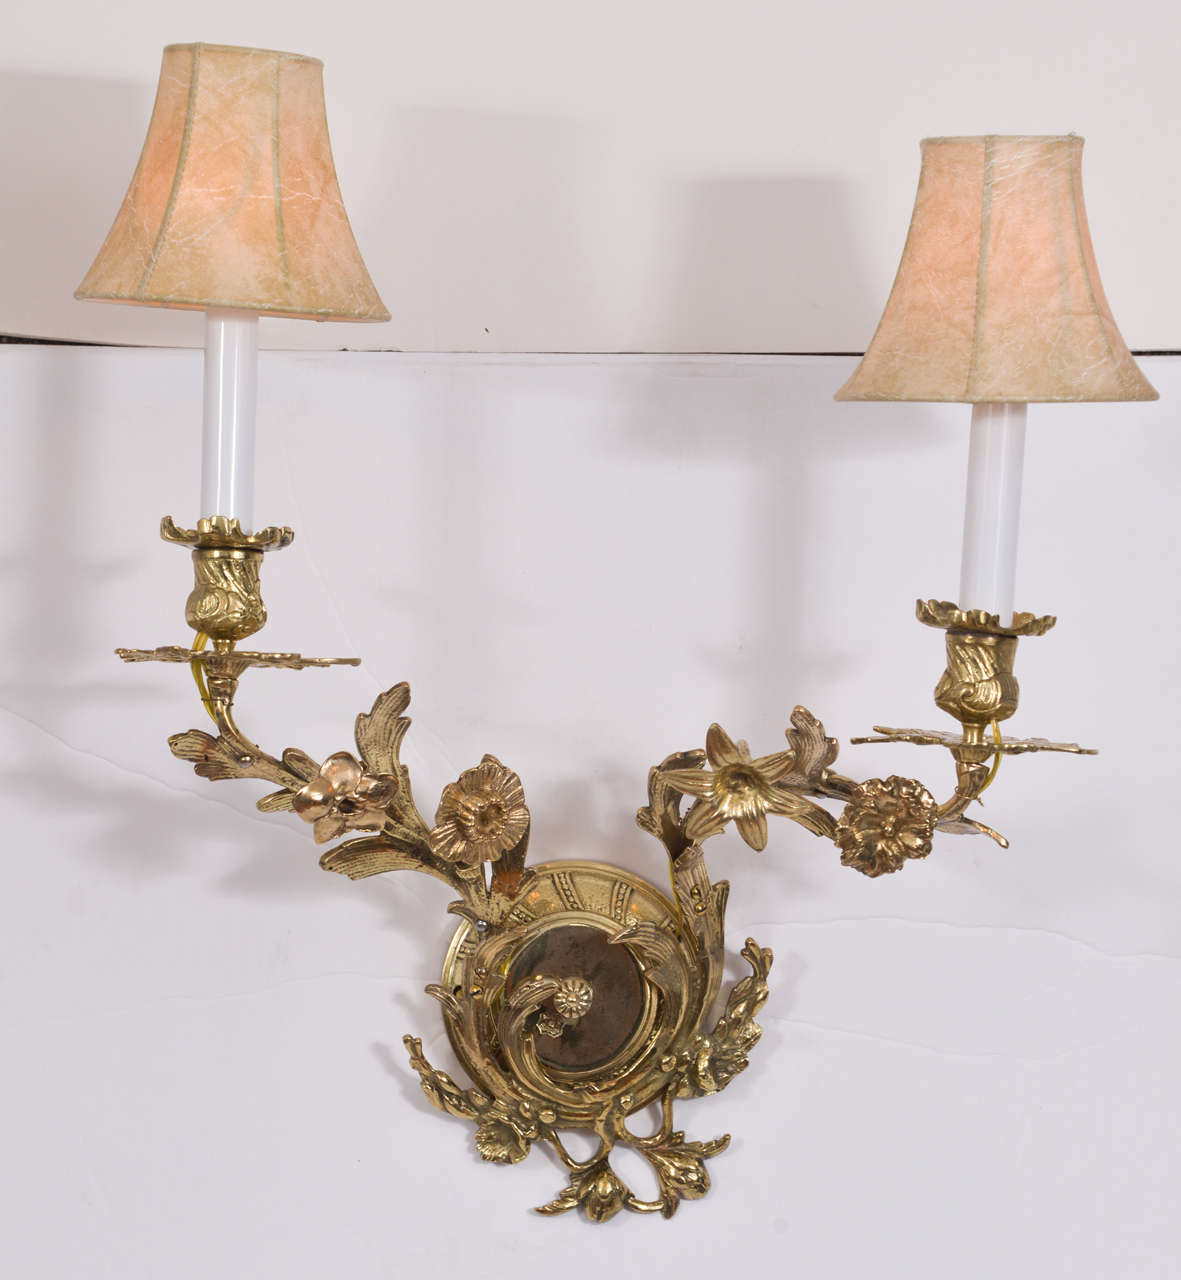 Beautiful Restored Brass Sconces, new wiring. Adorned with polished brass flowers and leaves.  Priced without shades.  Shades shown faux leather at $45 each.